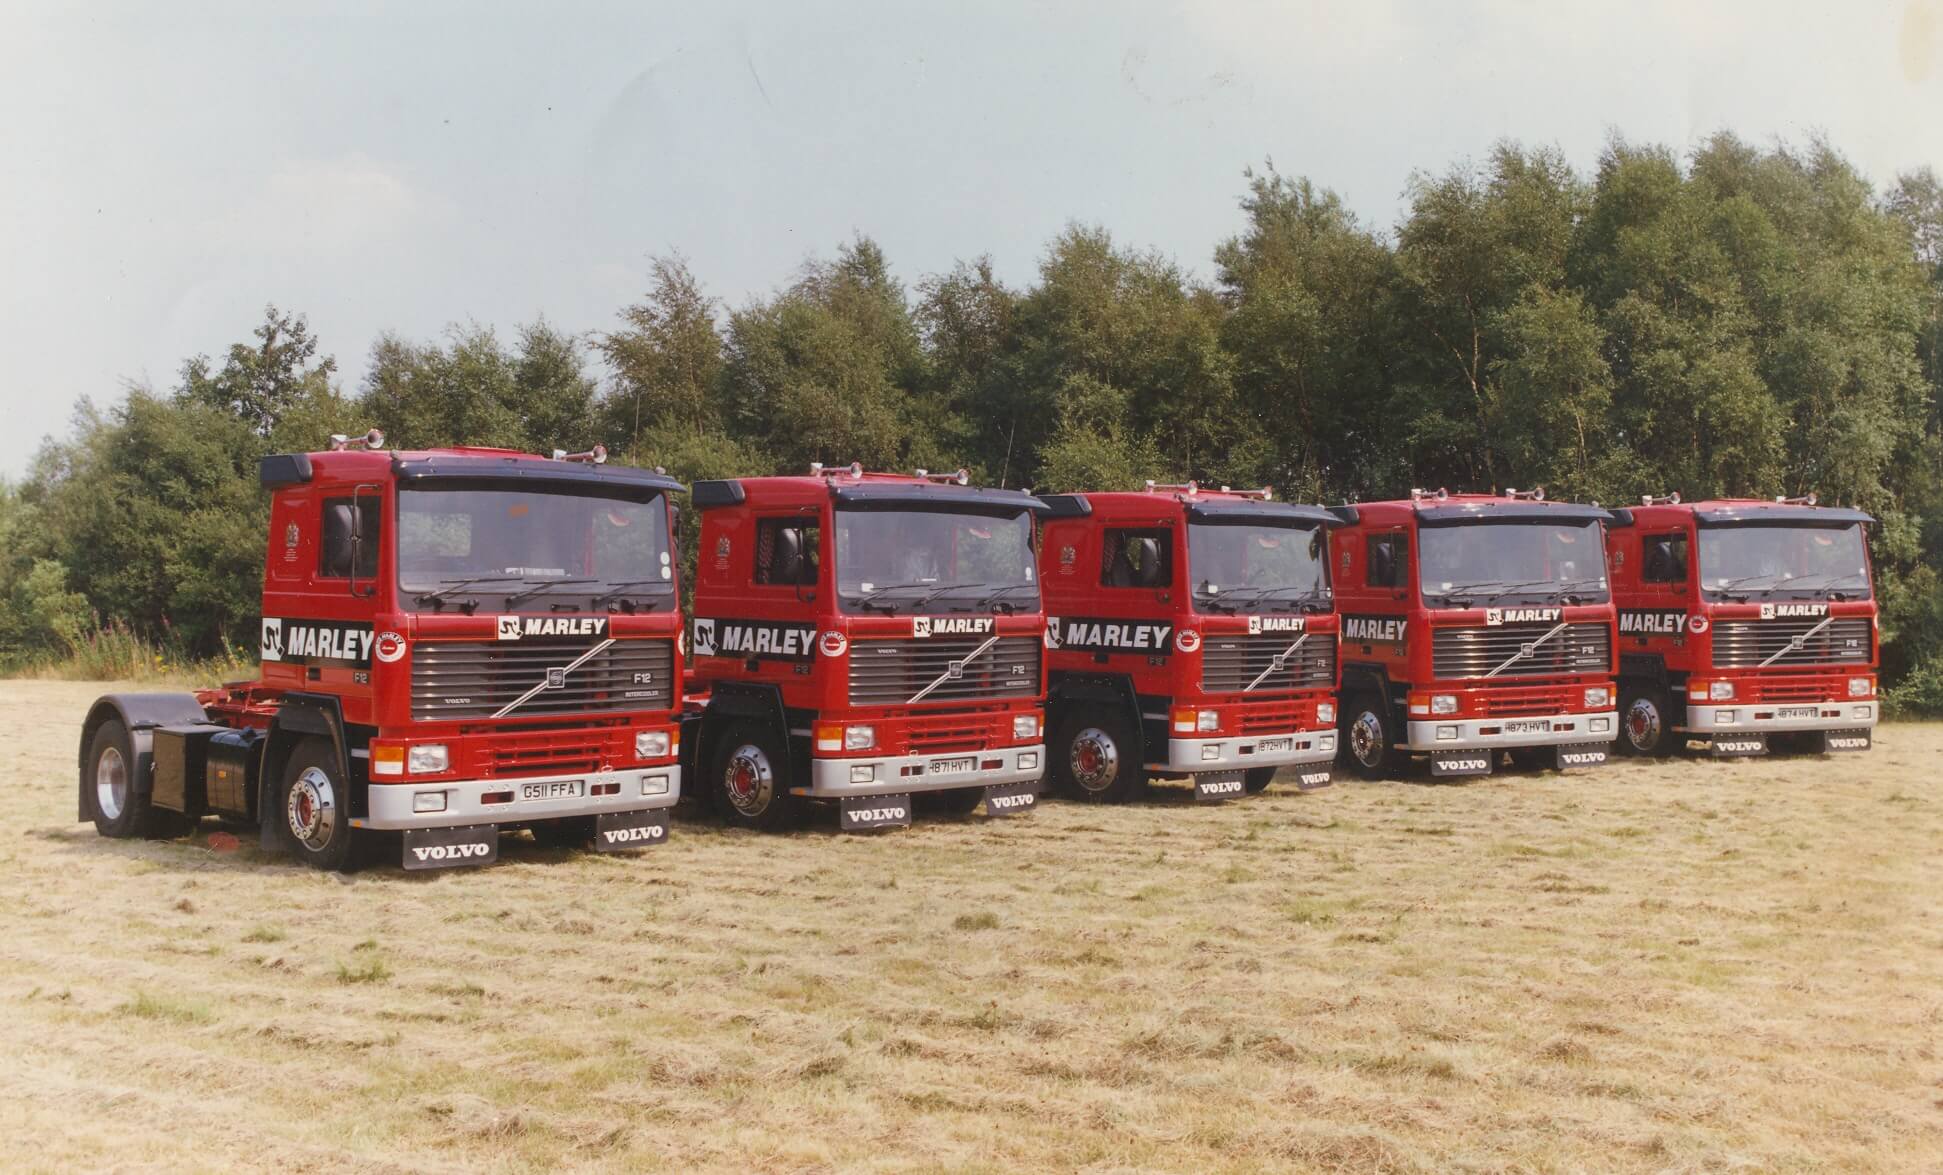 The 5 sisters new in 1990 H872 is in the middle